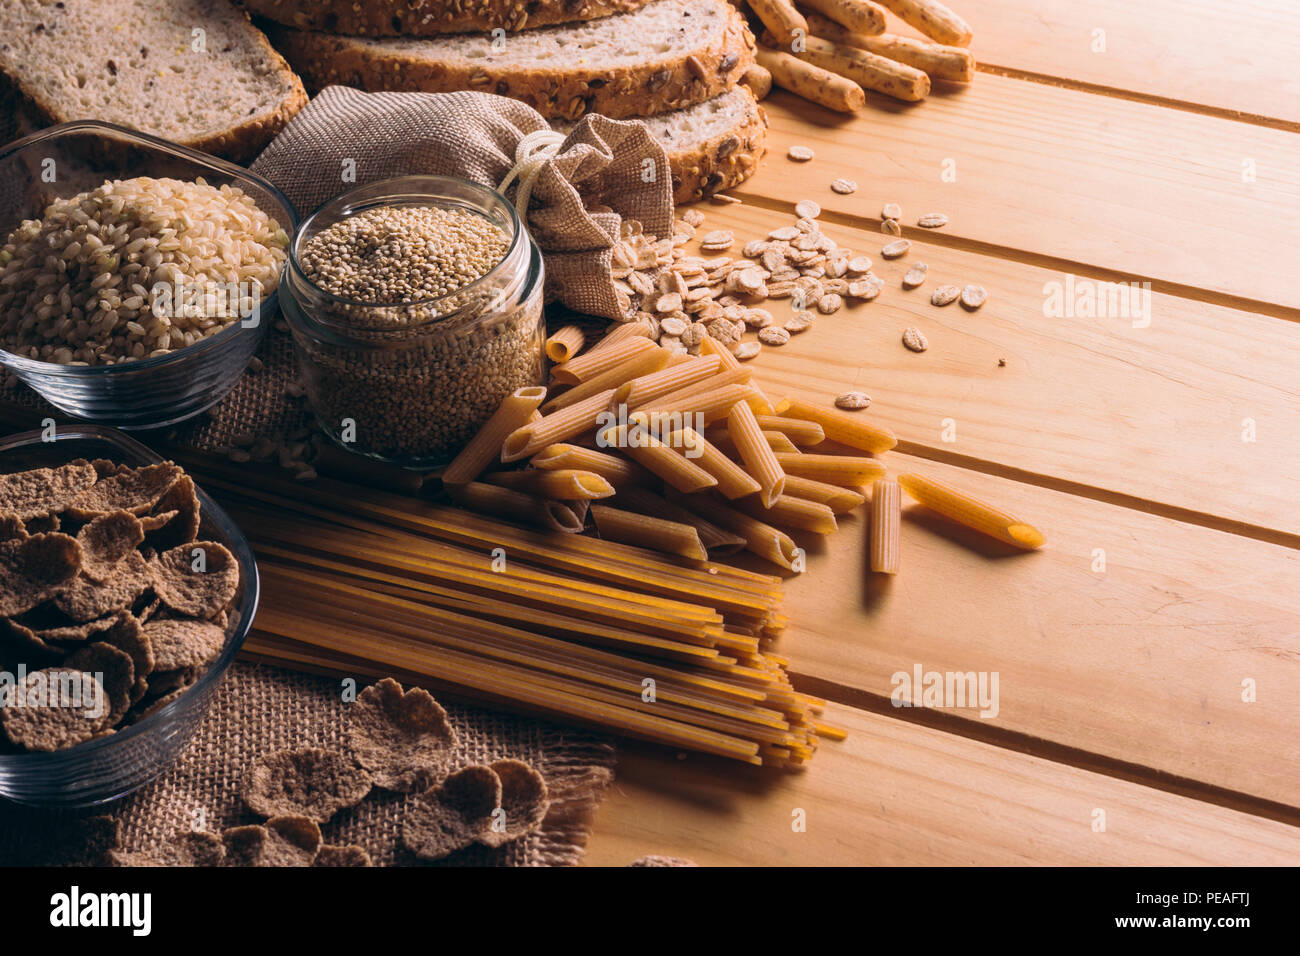 Wooden table full of fiber-rich whole foods, perfect for a balanced diet Stock Photo